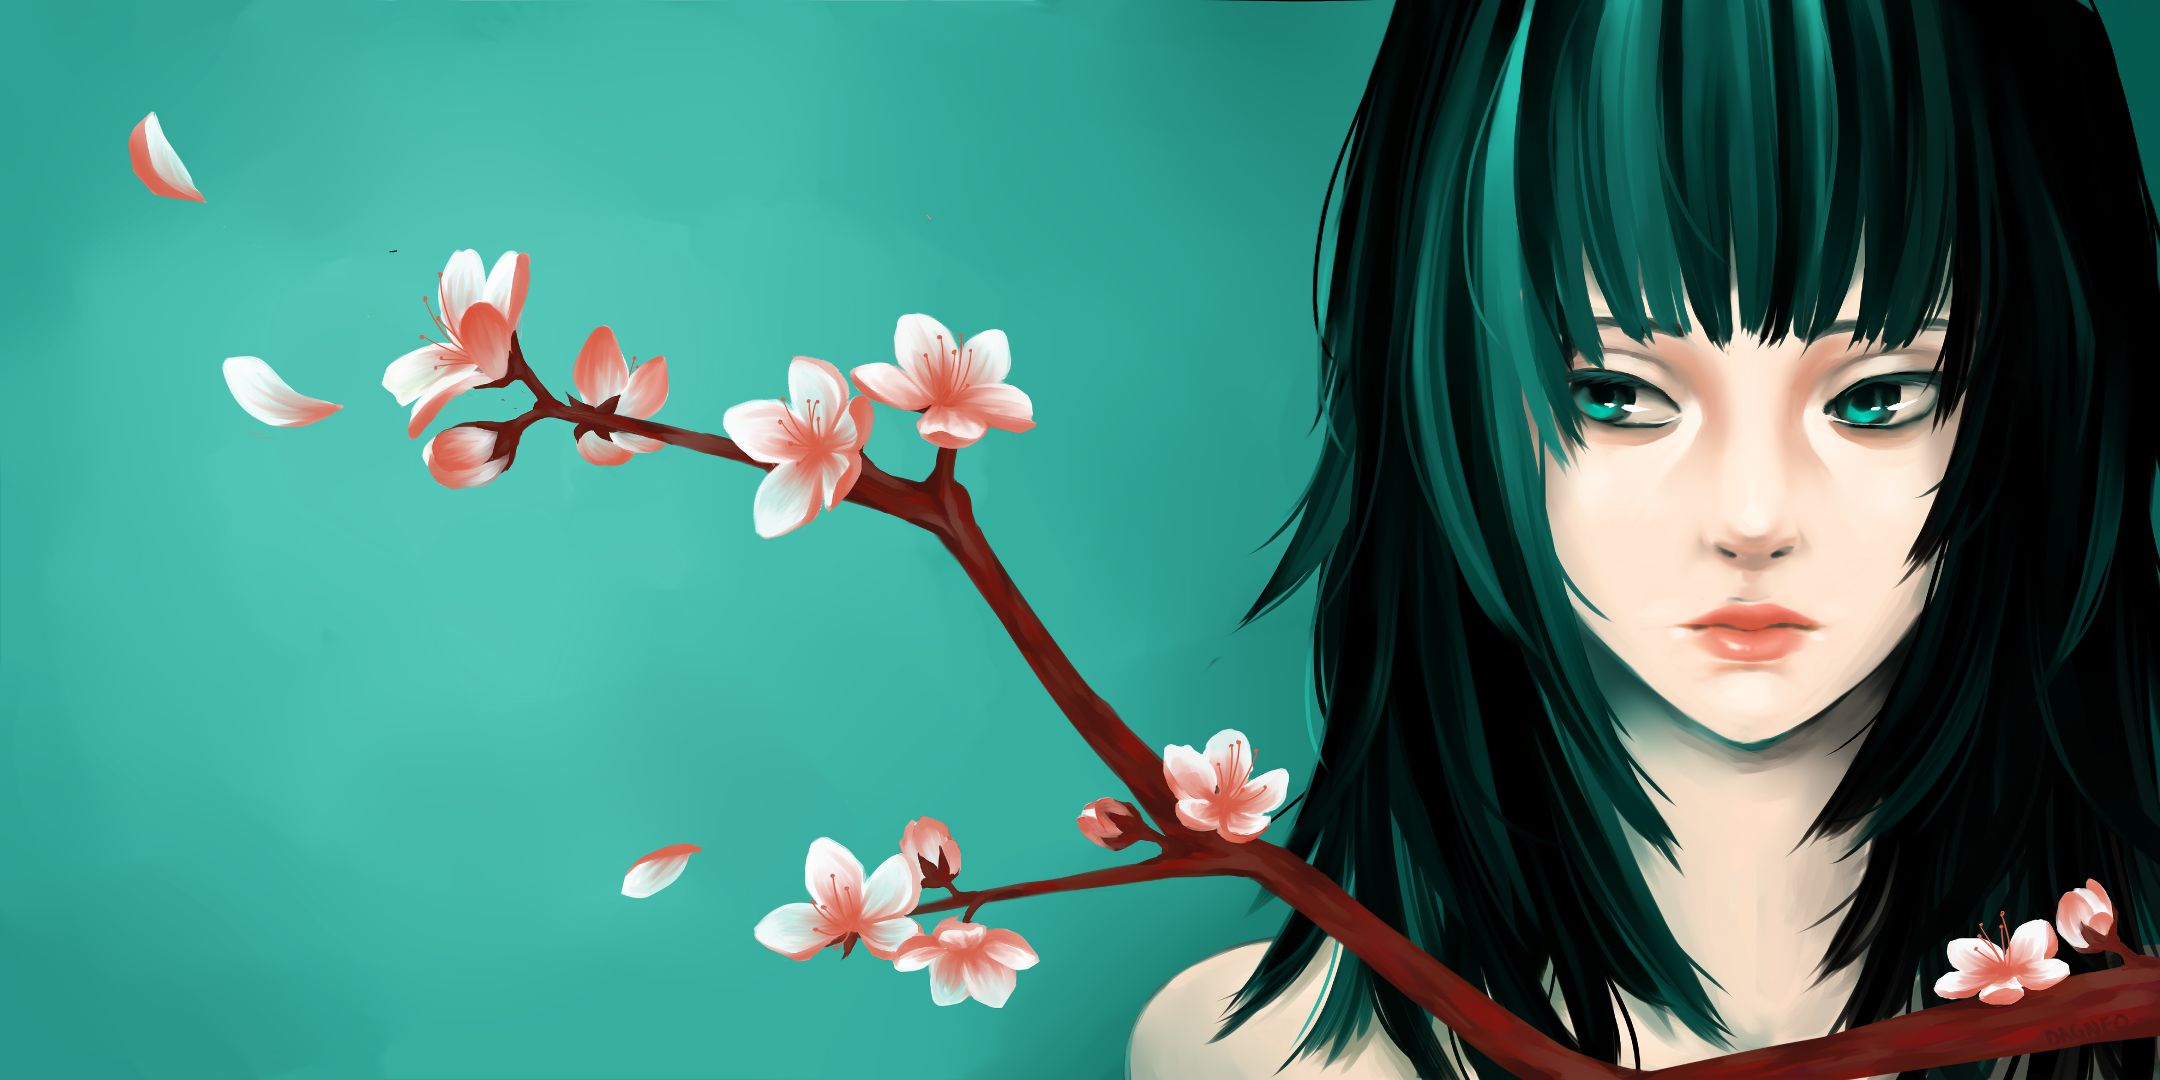 women, artistic, blossom, branch, green eyes, green hair, painting, teal